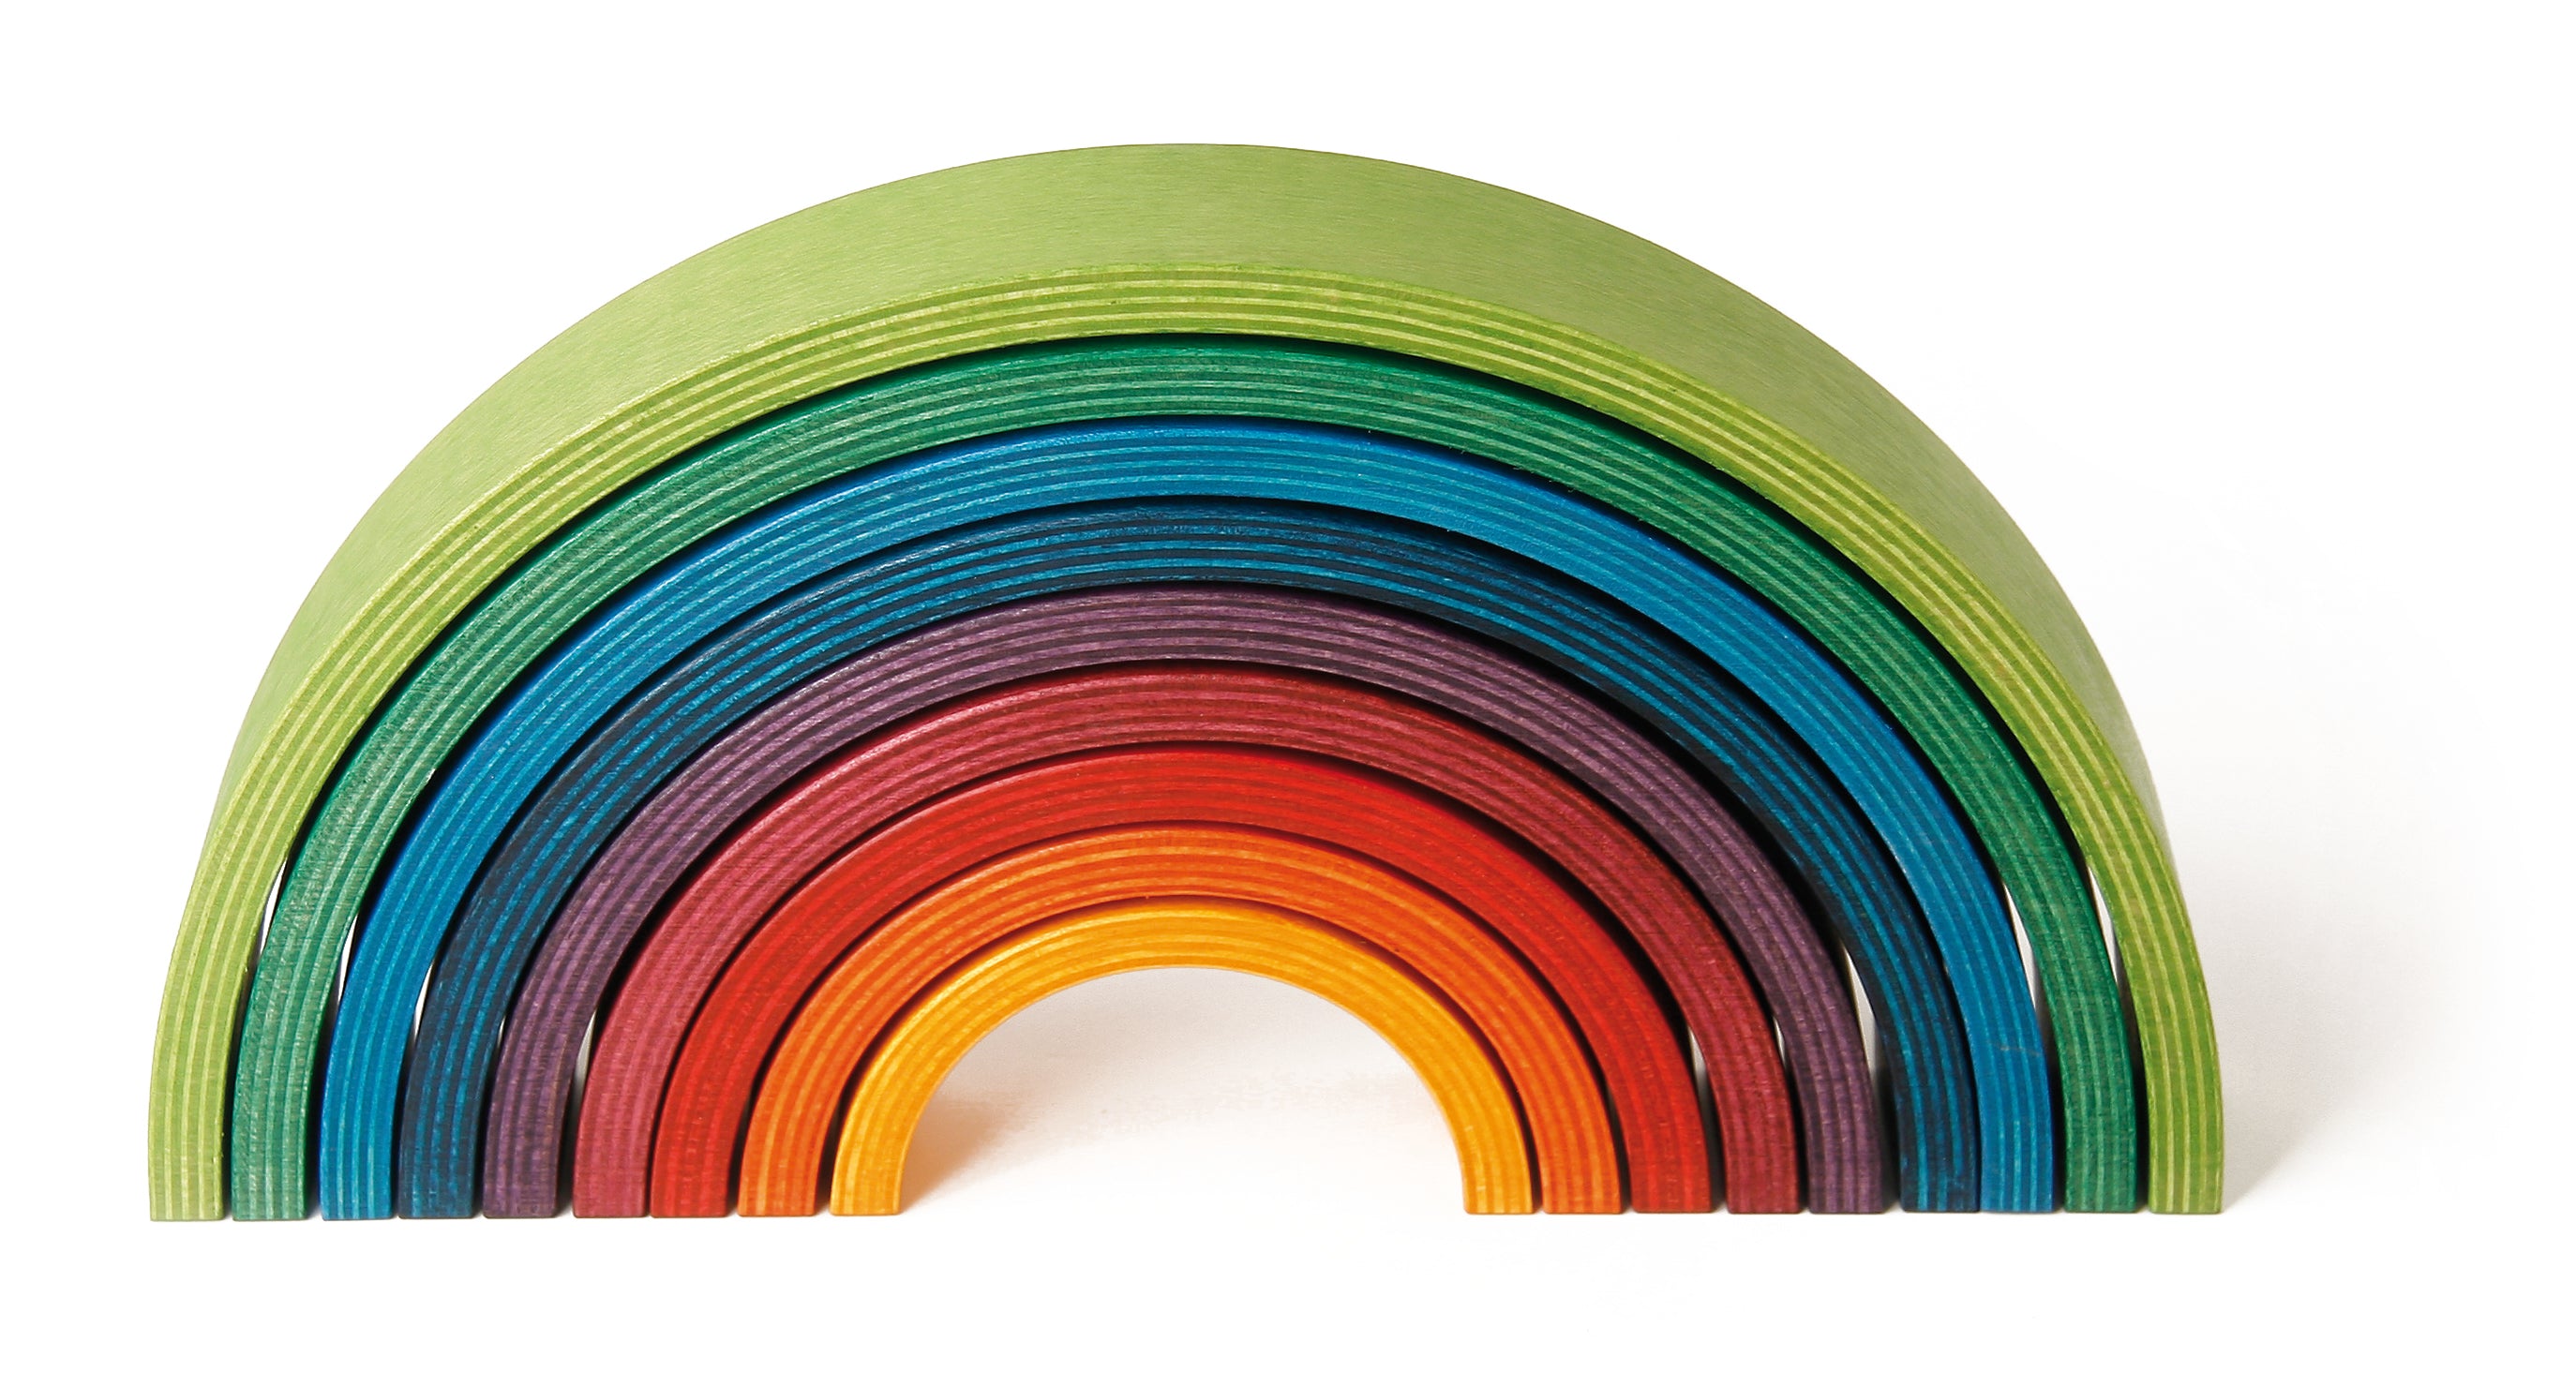 RainbowWooden Toy by Naef Swiss since 1954